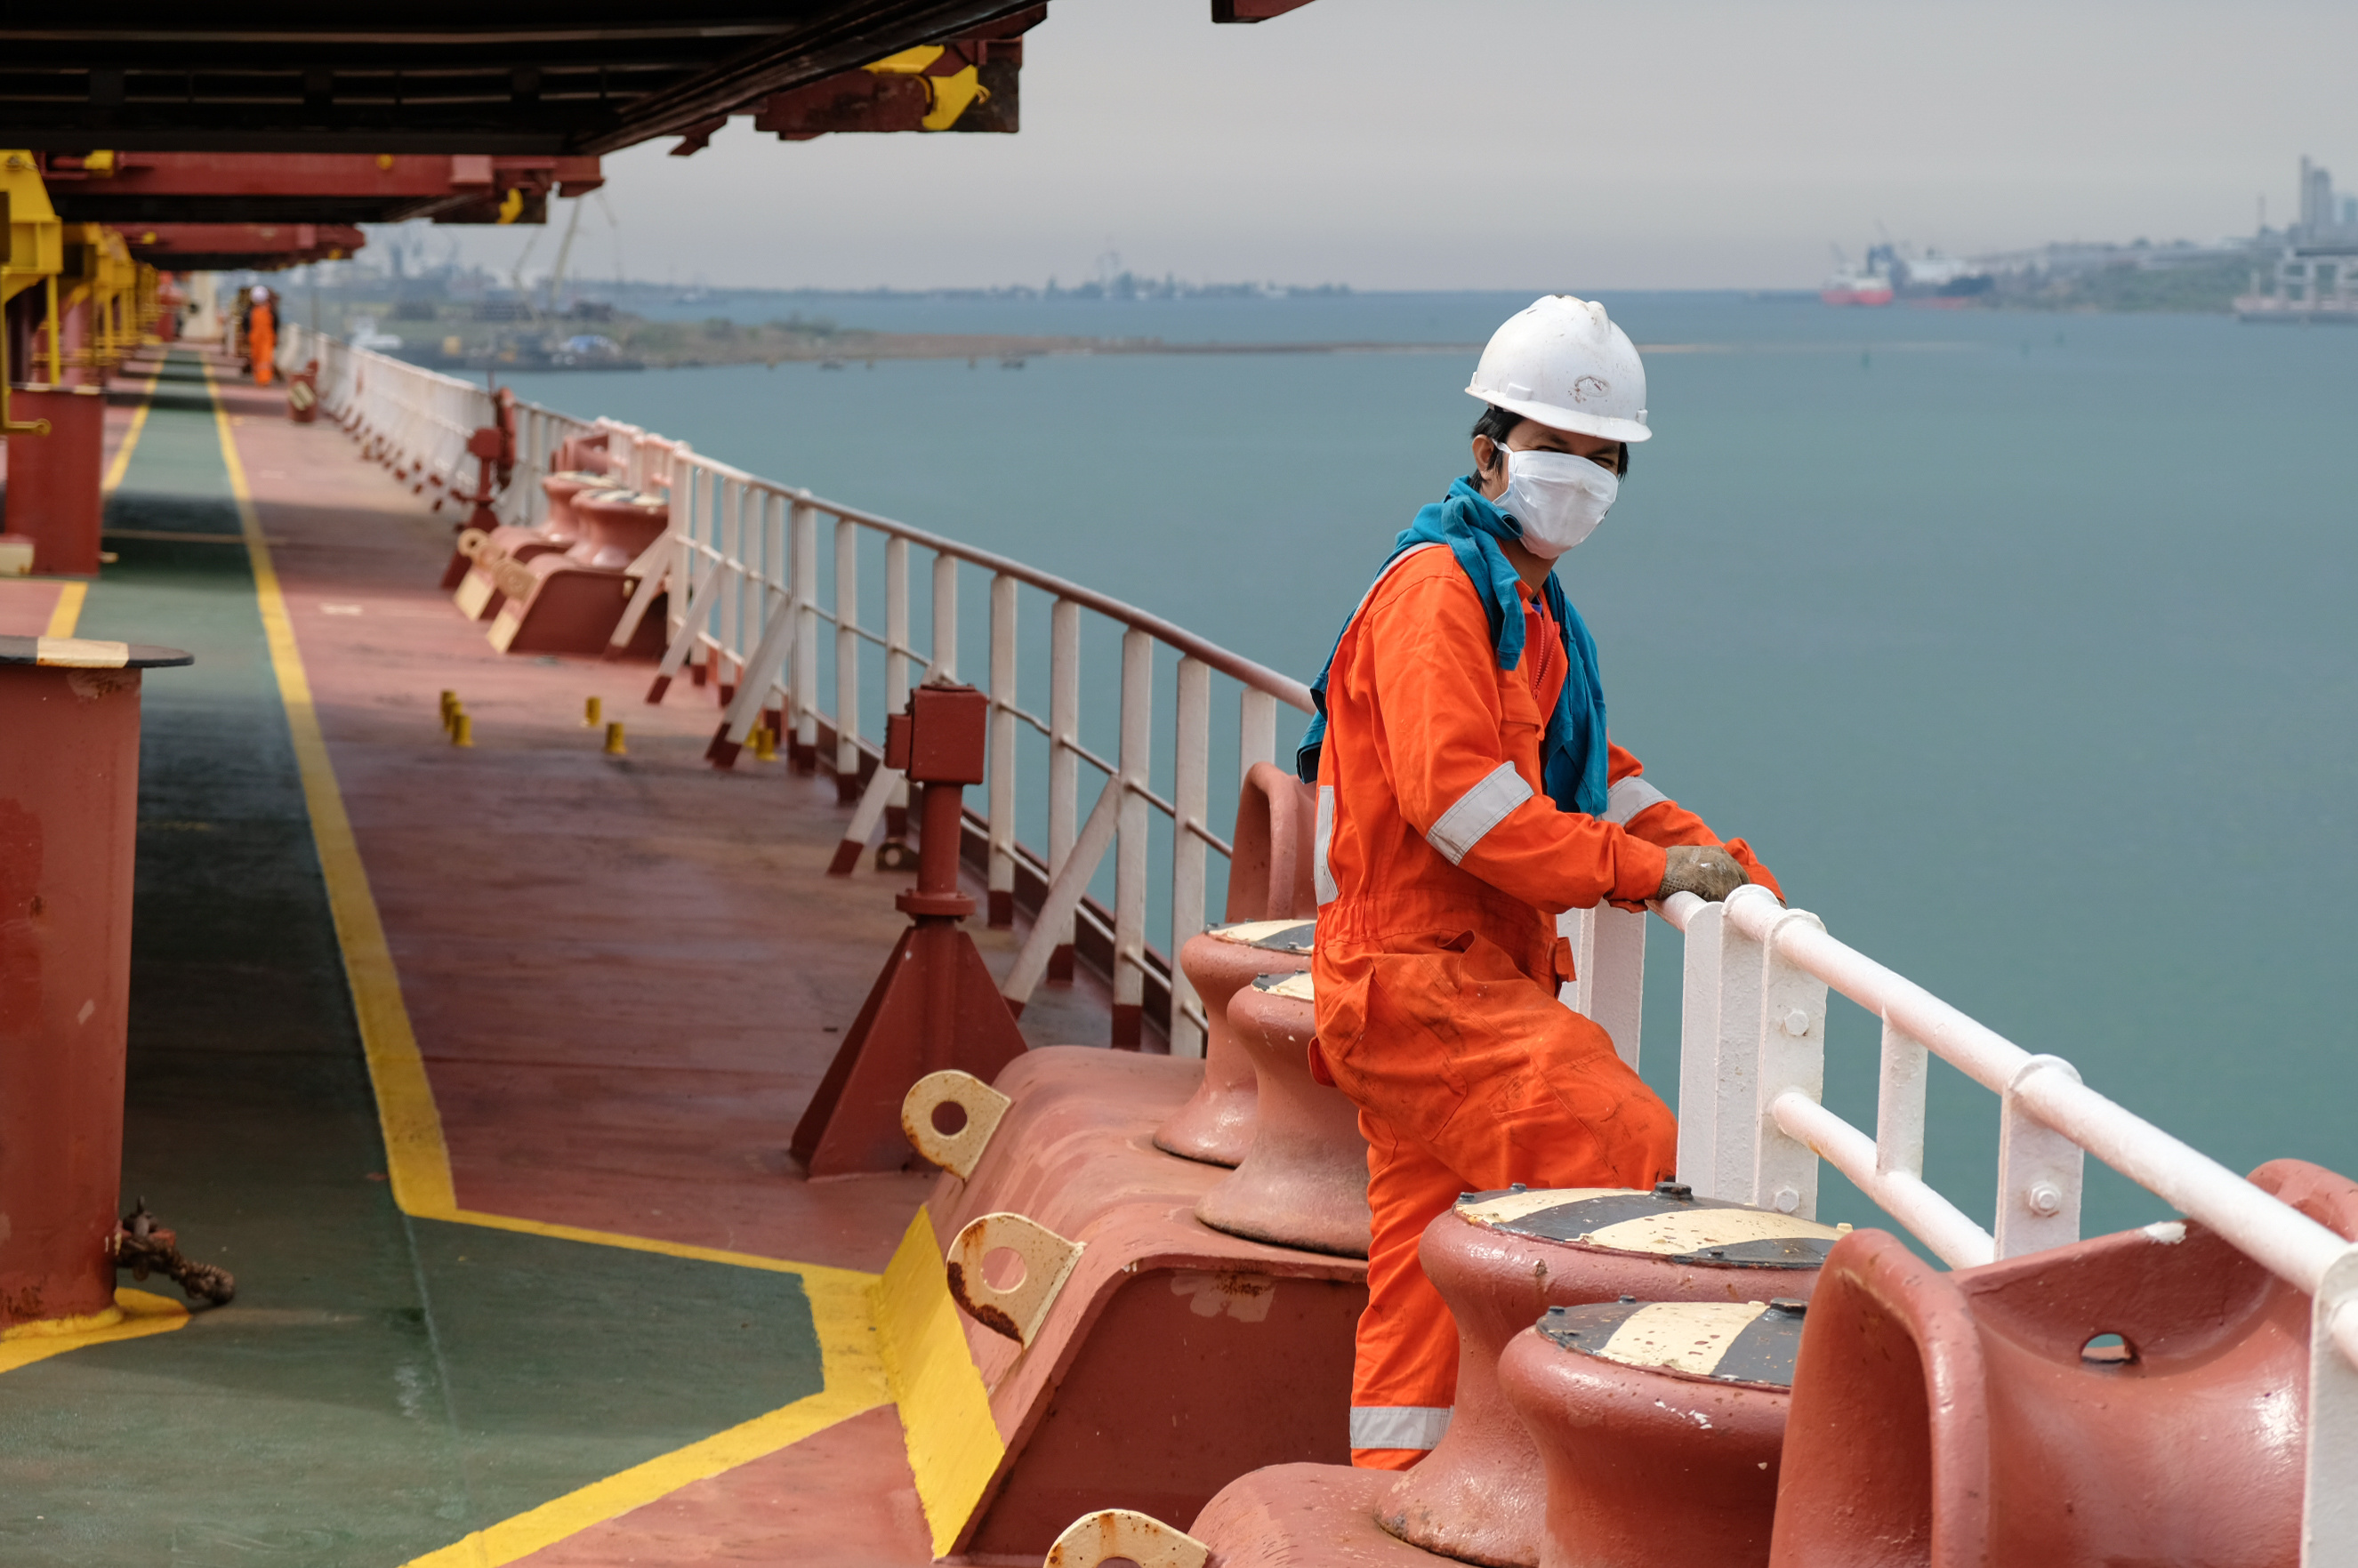 Crew changes are a particular challenge and the safety and wellbeing of seafarers is the Freight Department's top priority